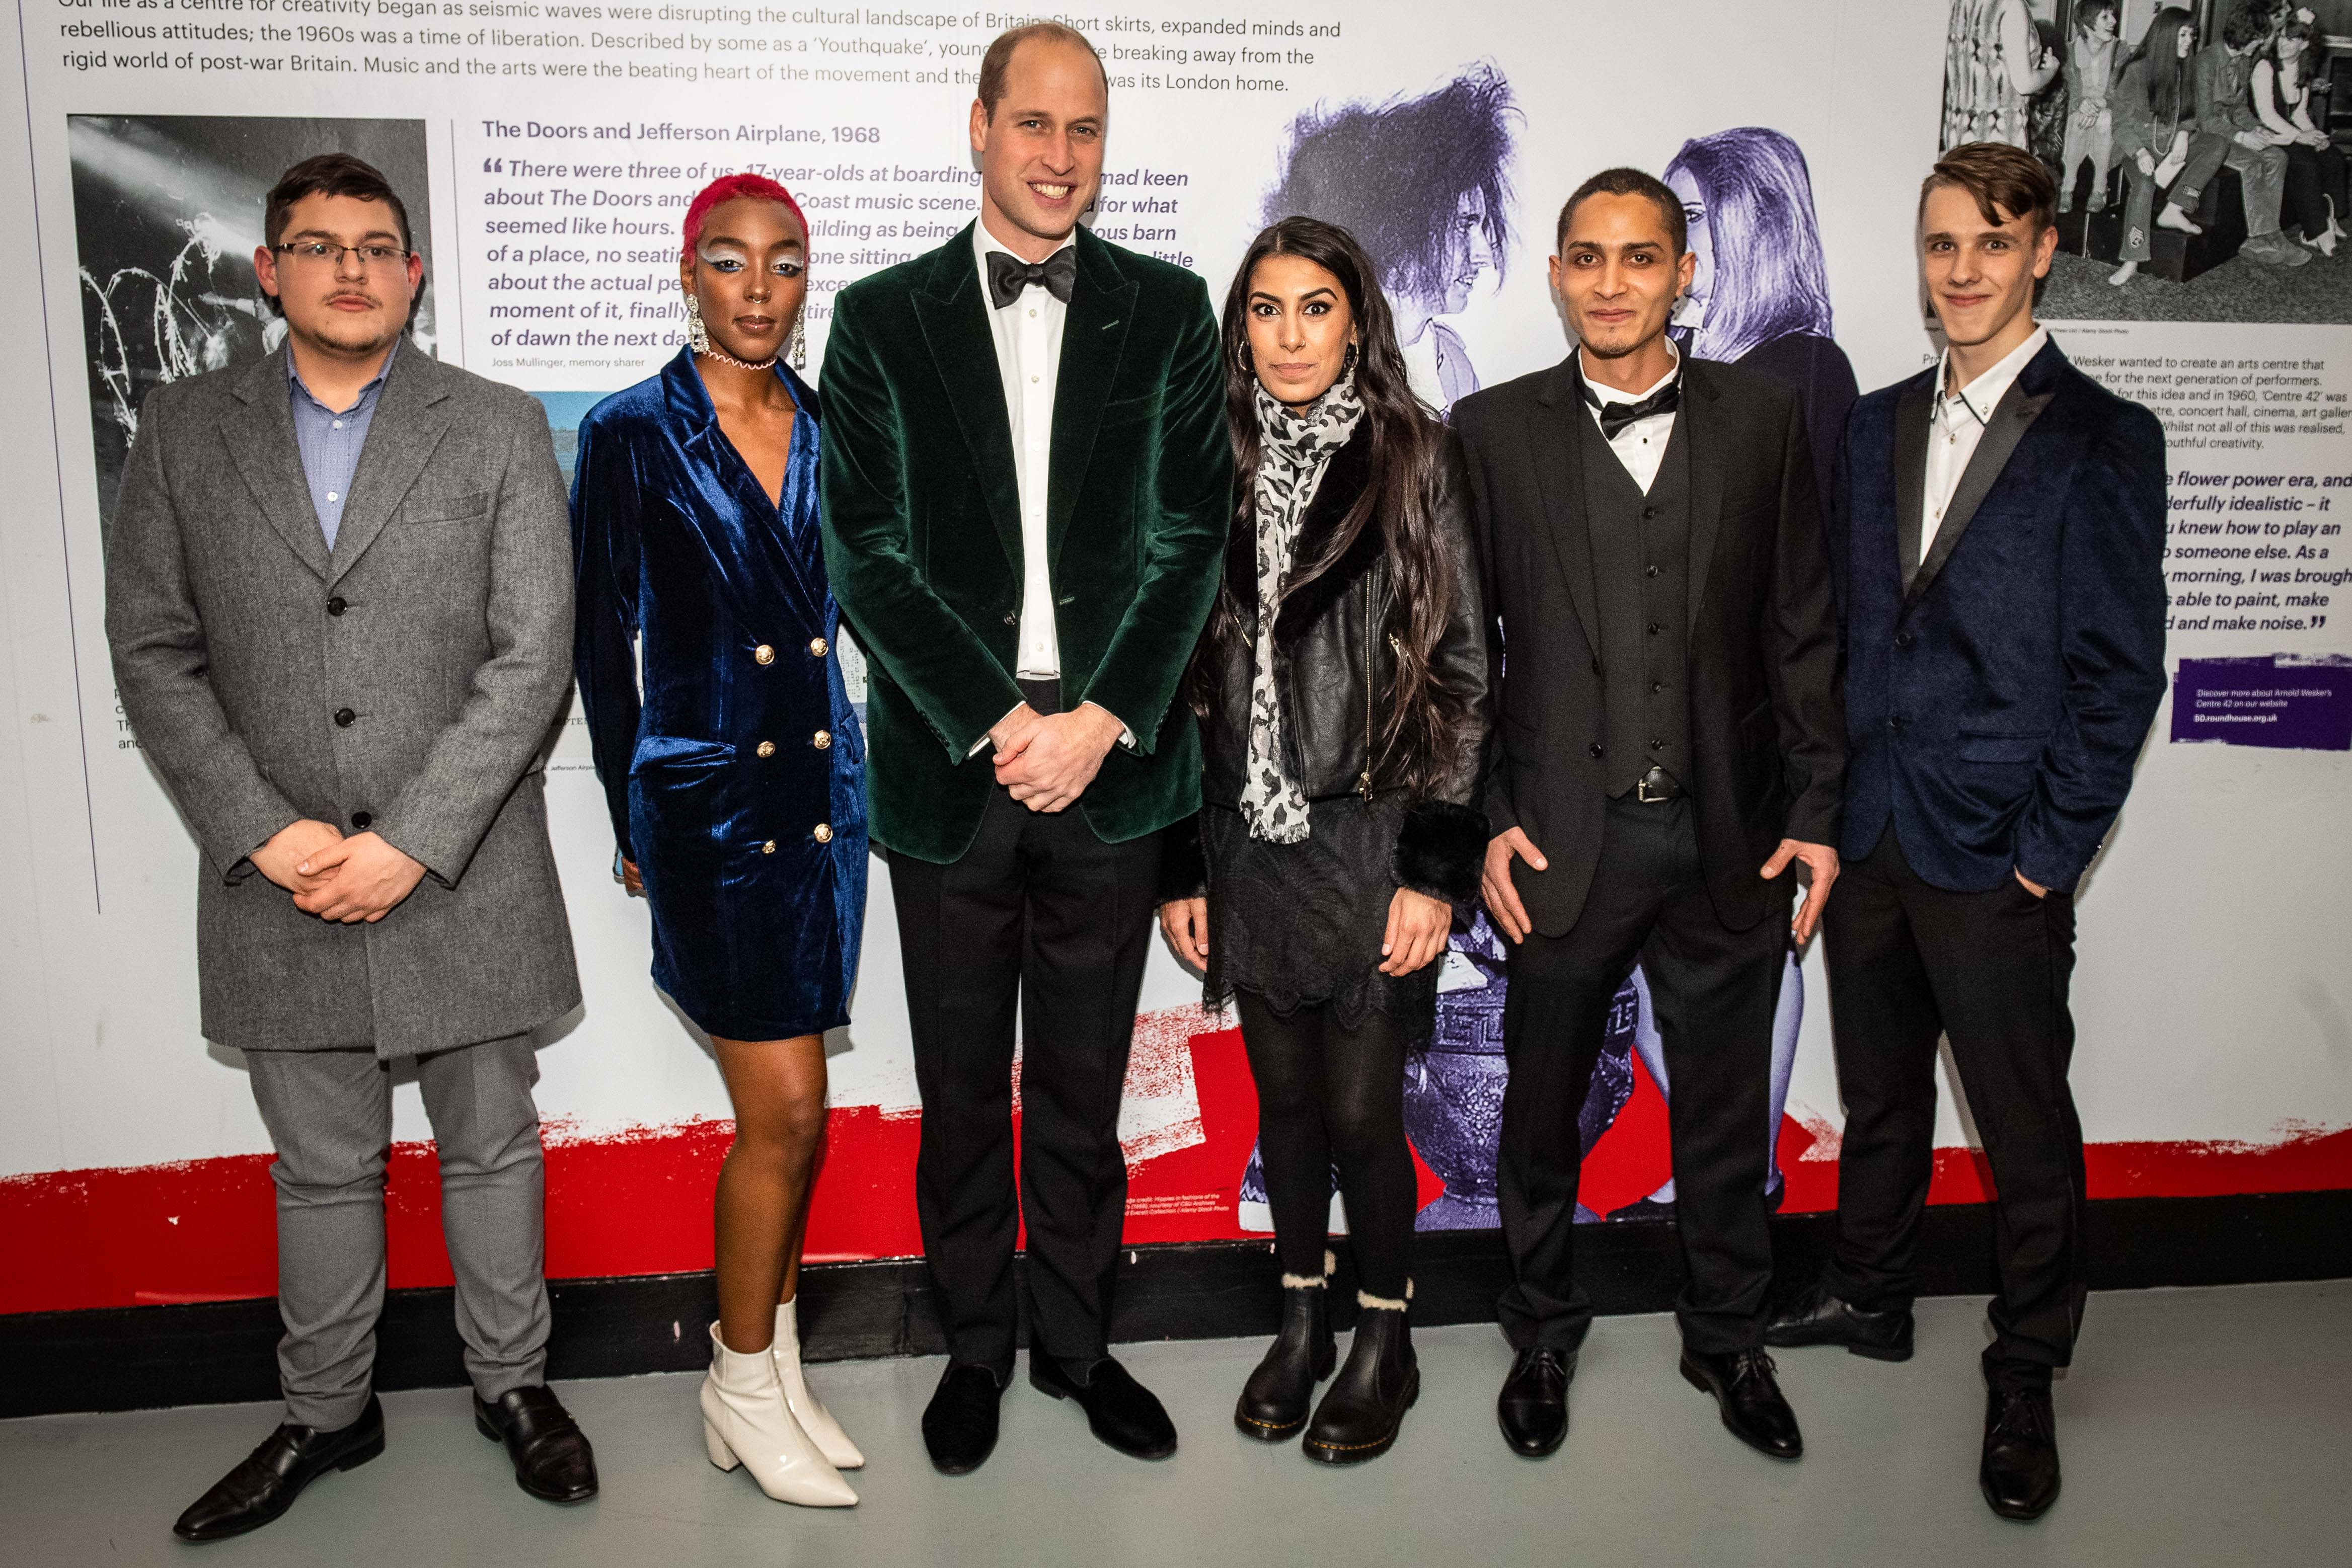 The Duke of Cambridge, alongside residents of Centrepoint's Apprenticeship House, attends the Centrepoint 50th anniversary gala.